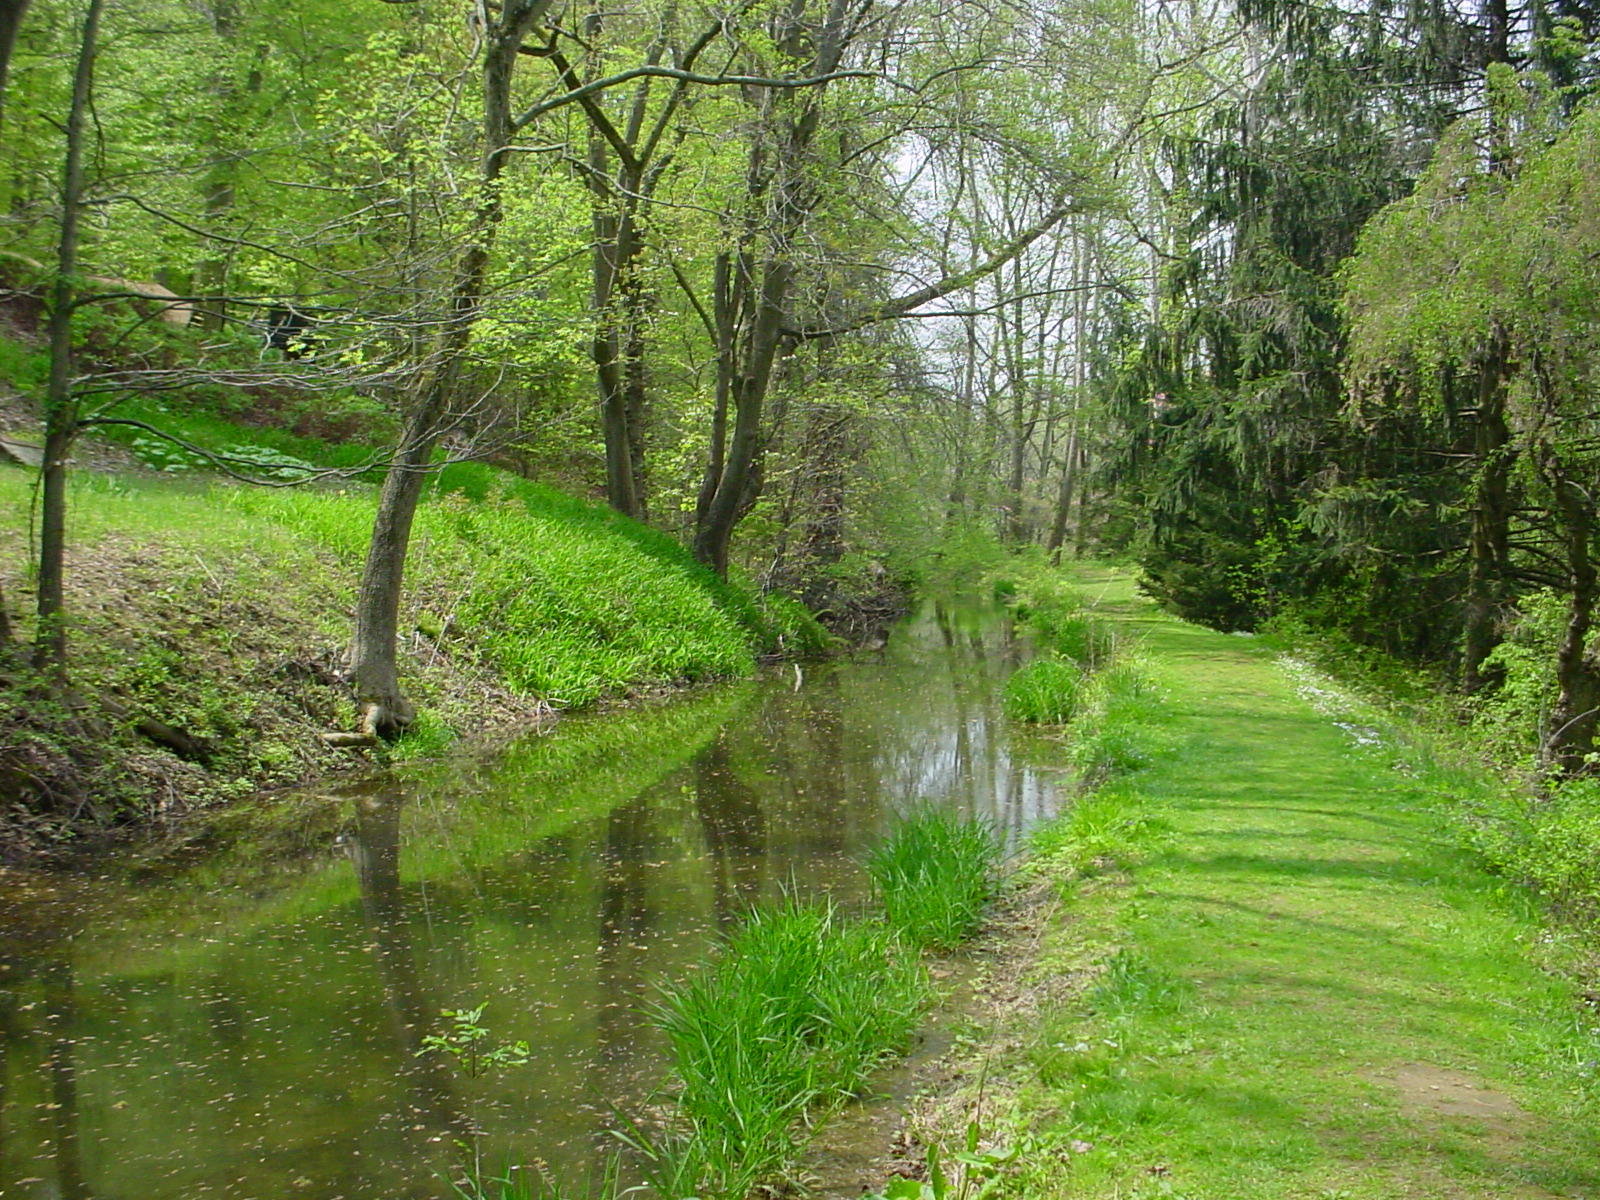 The historic millrace in springtime